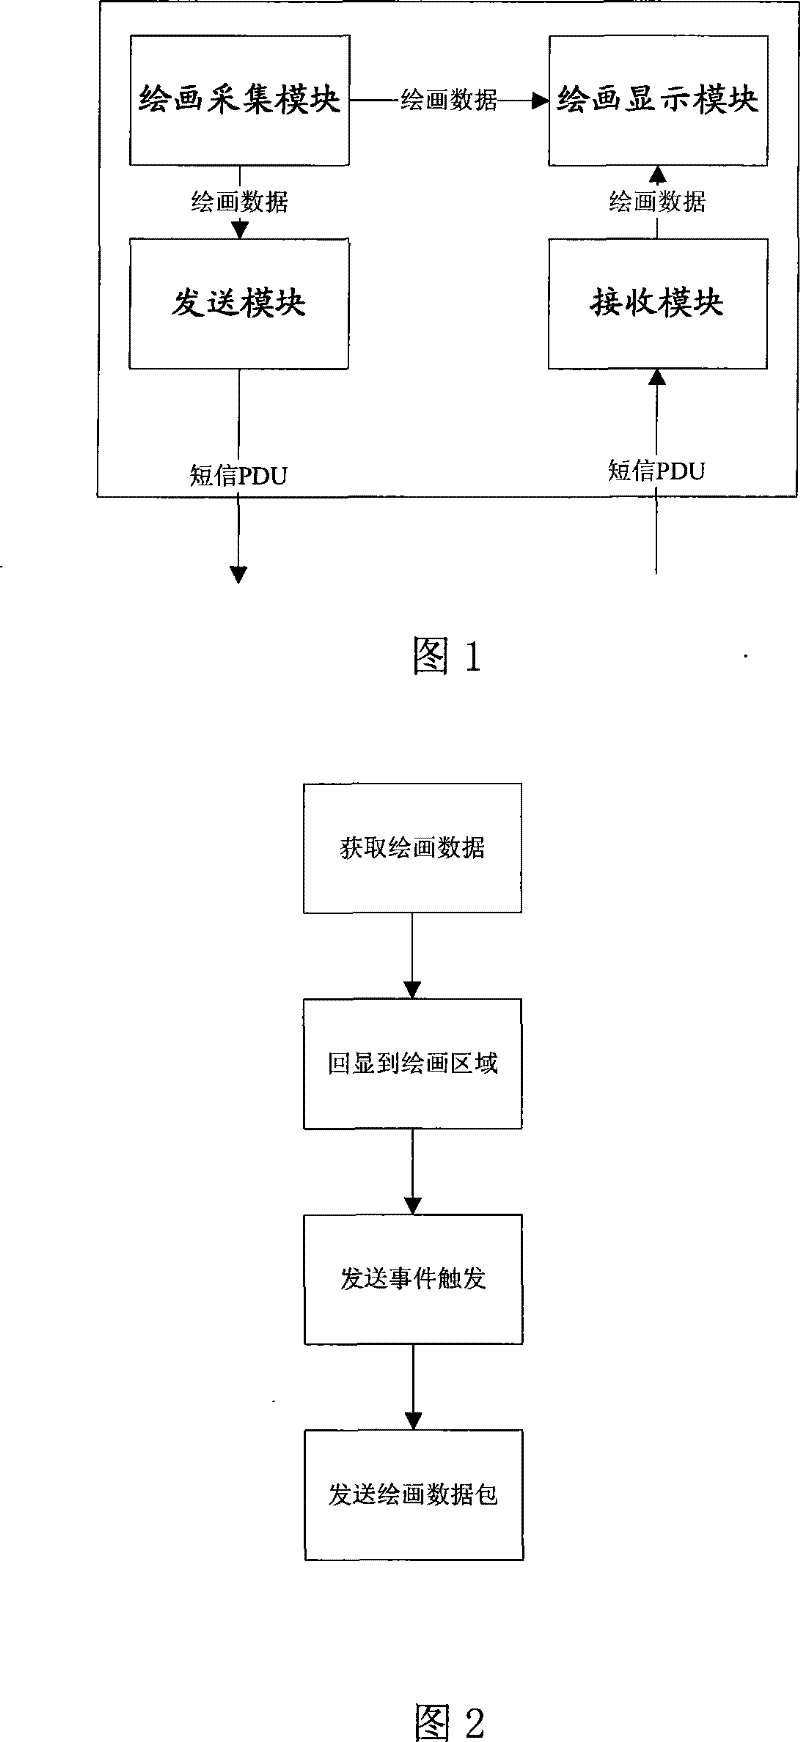 Mobile terminal and its communication method